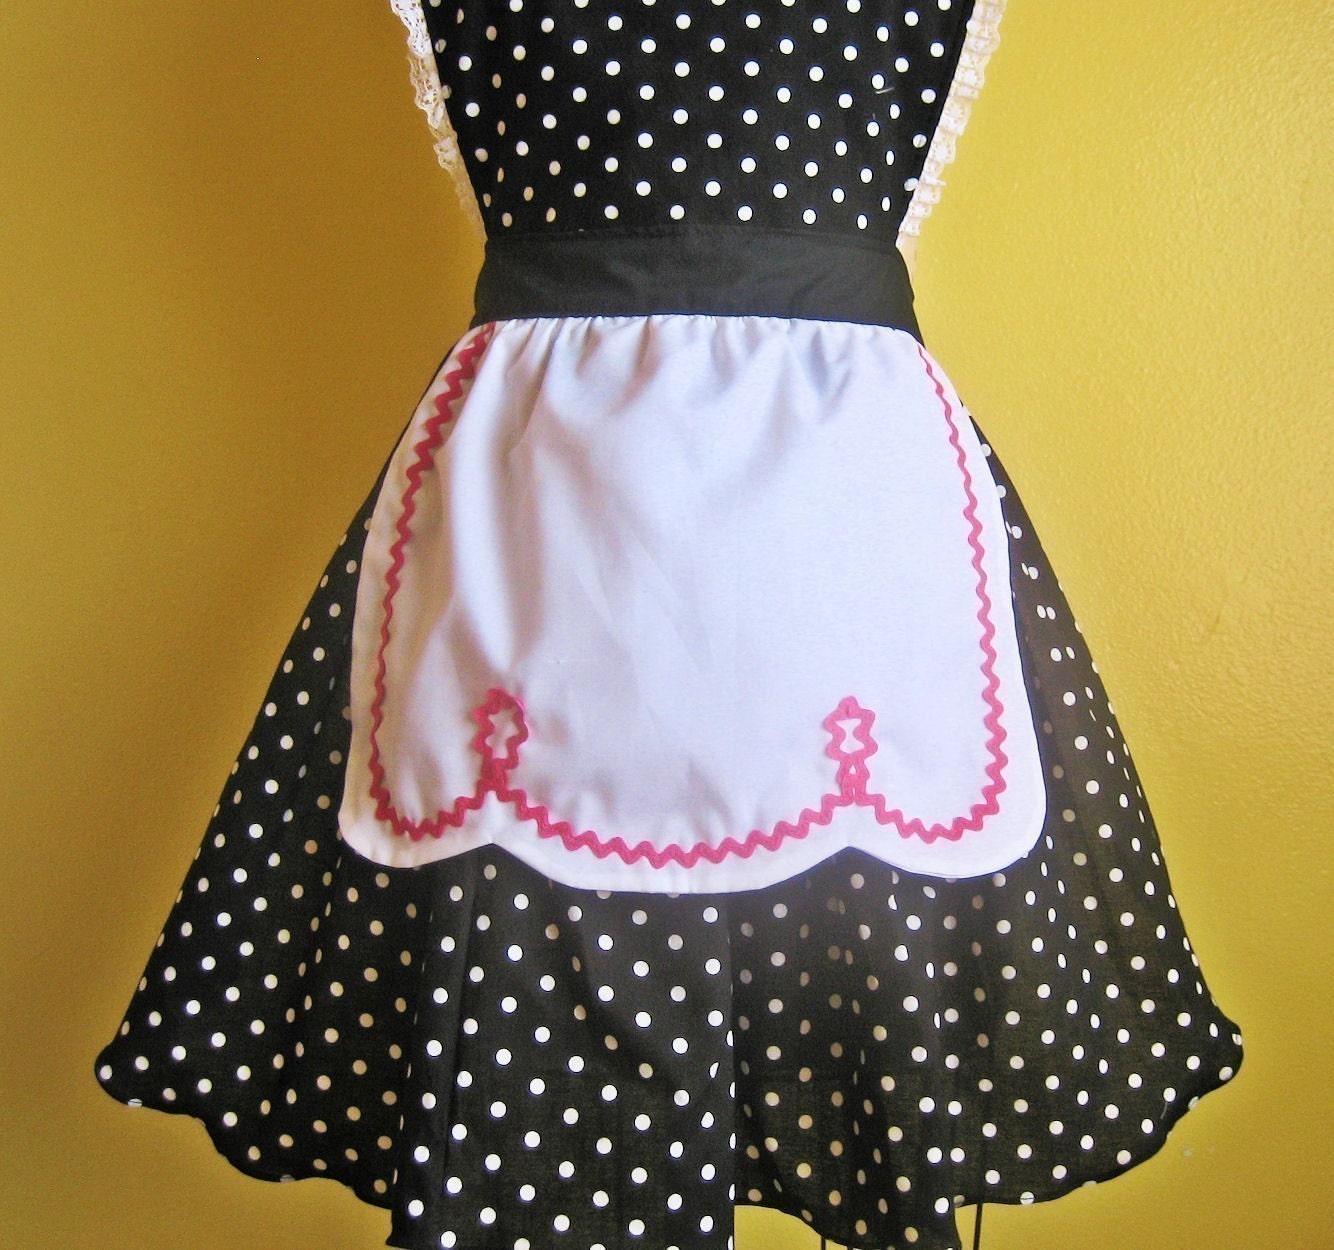 Retro 50s BLACK POLKA DOT full APRON with fifties ric rac details make a sexy hostess and is vintage inspired